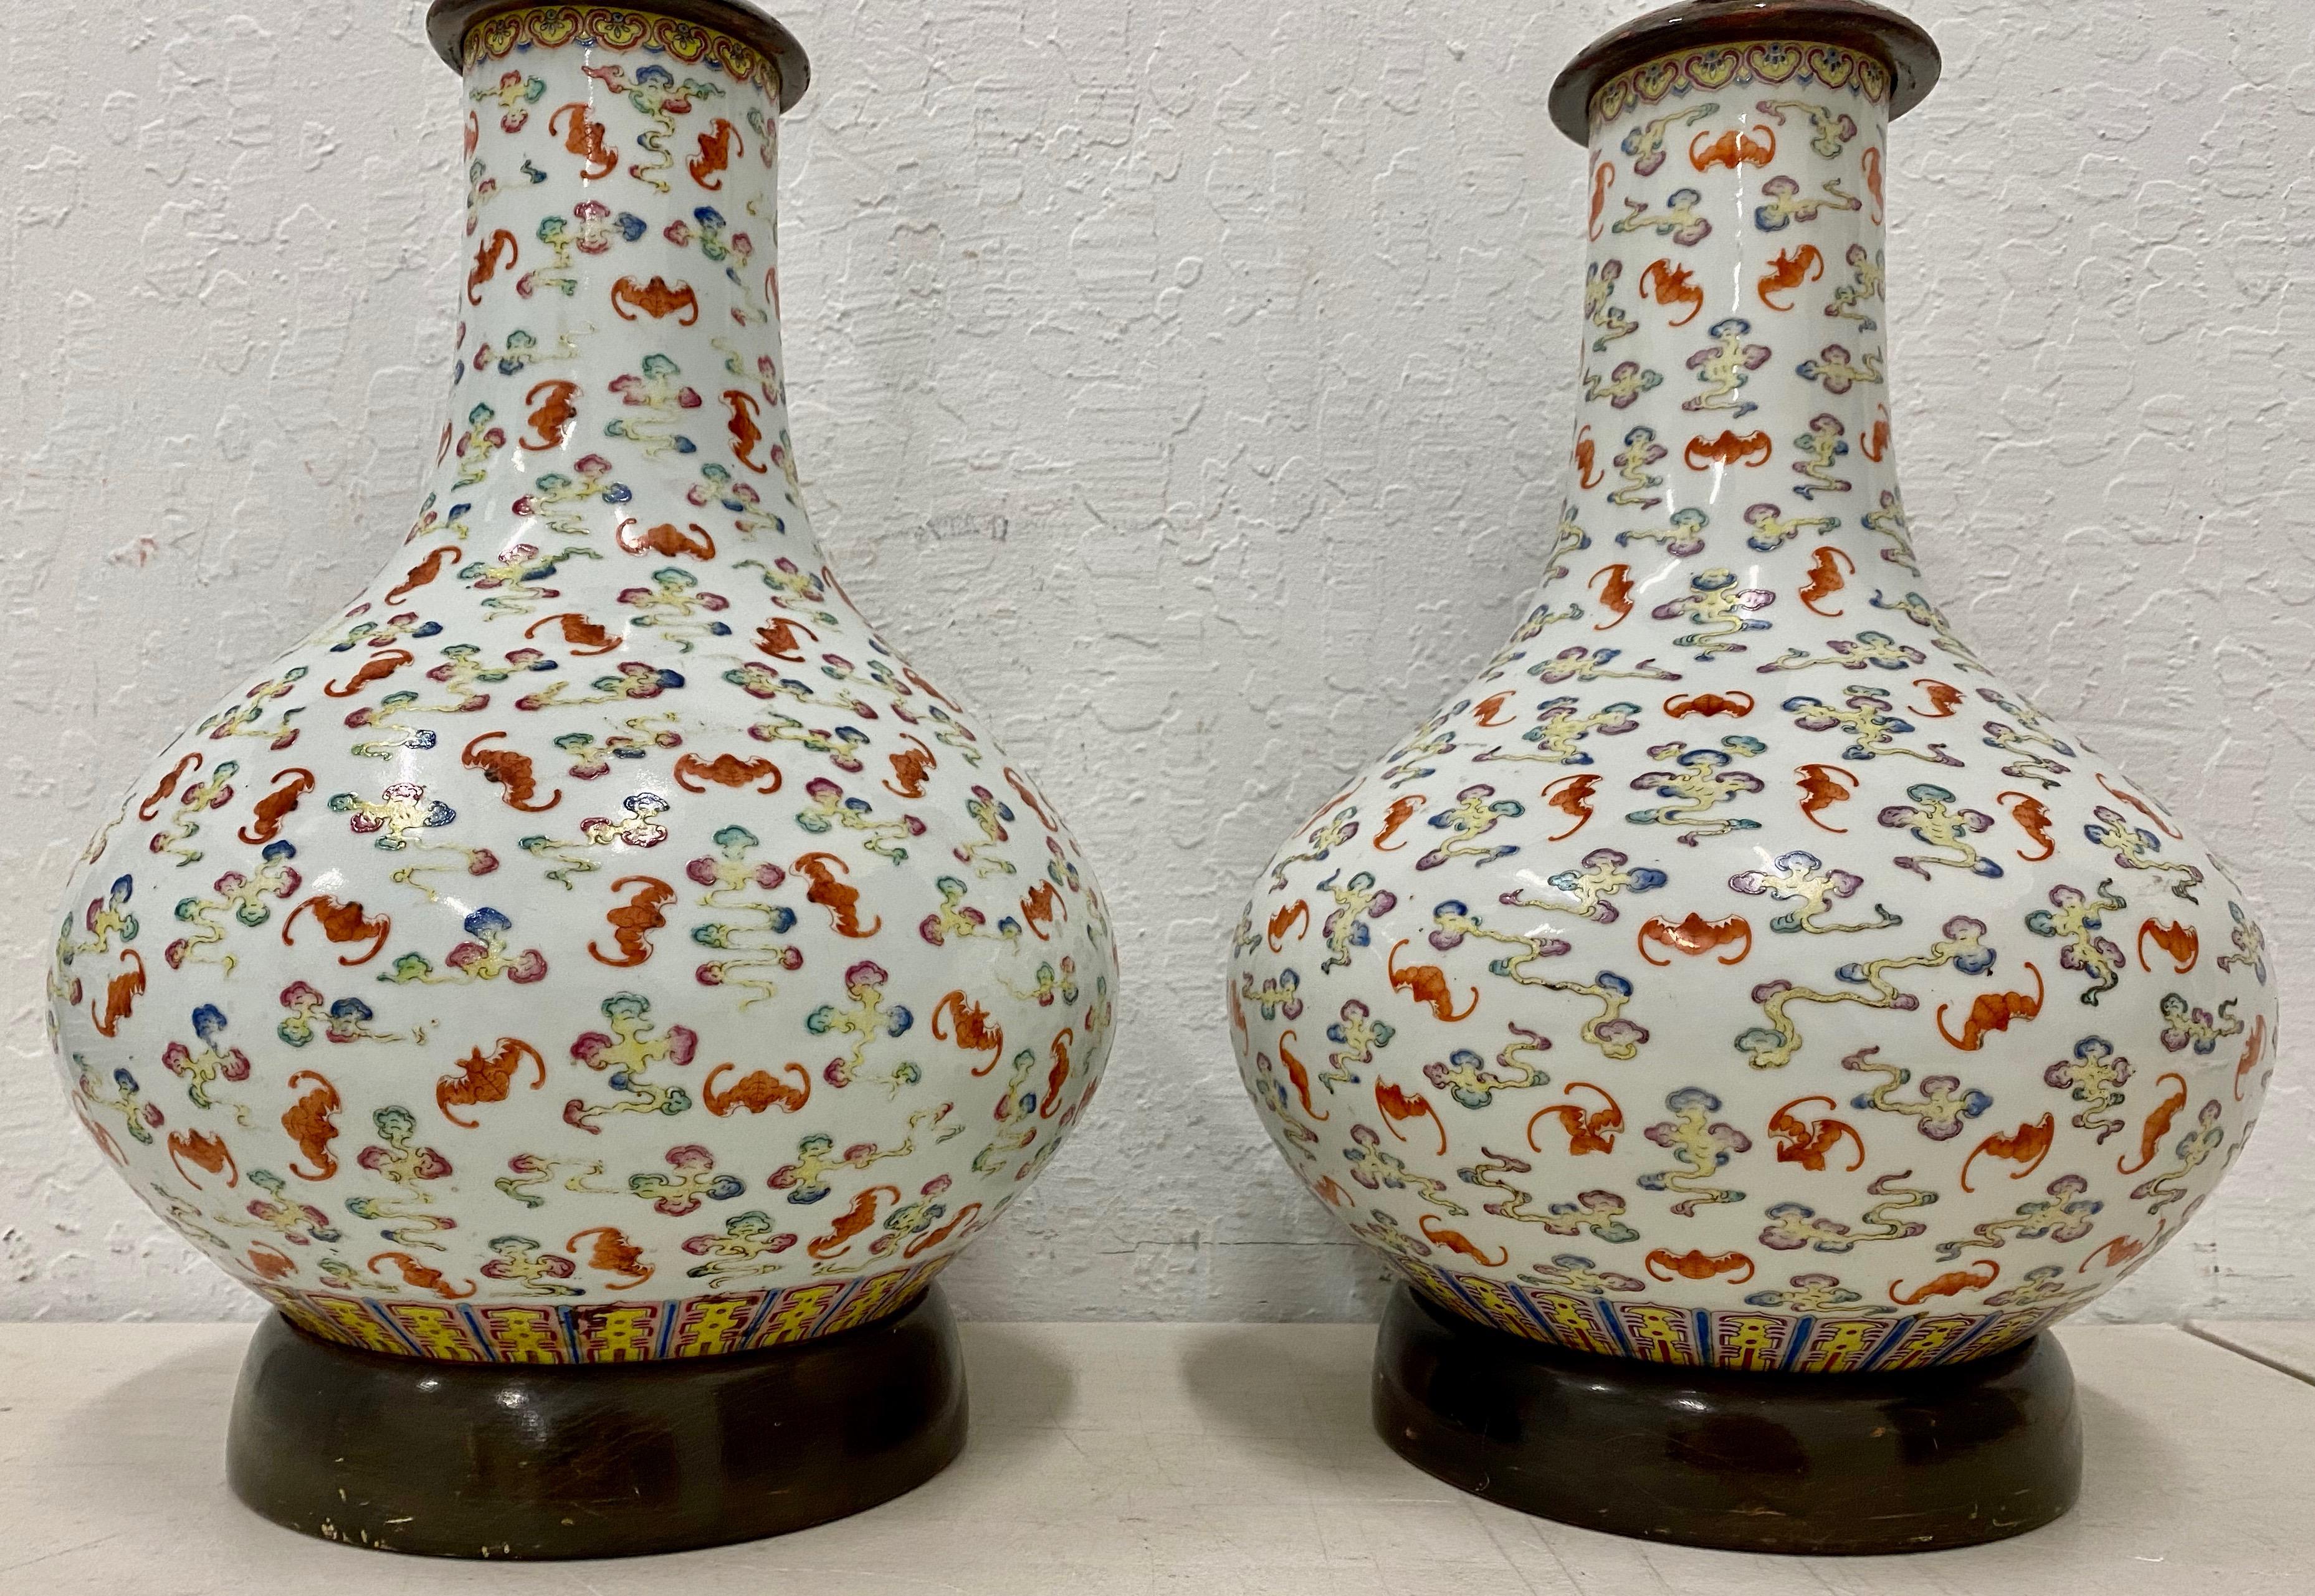 Pair of hand painted Qing dynasty porcelain vase table lamps, circa 1910s-1940s

Gorgeous hand painted vases converted to table lamps.

100 bats design. Good luck. Good fortune.

The lamps are in very good condition. They are wired and ready